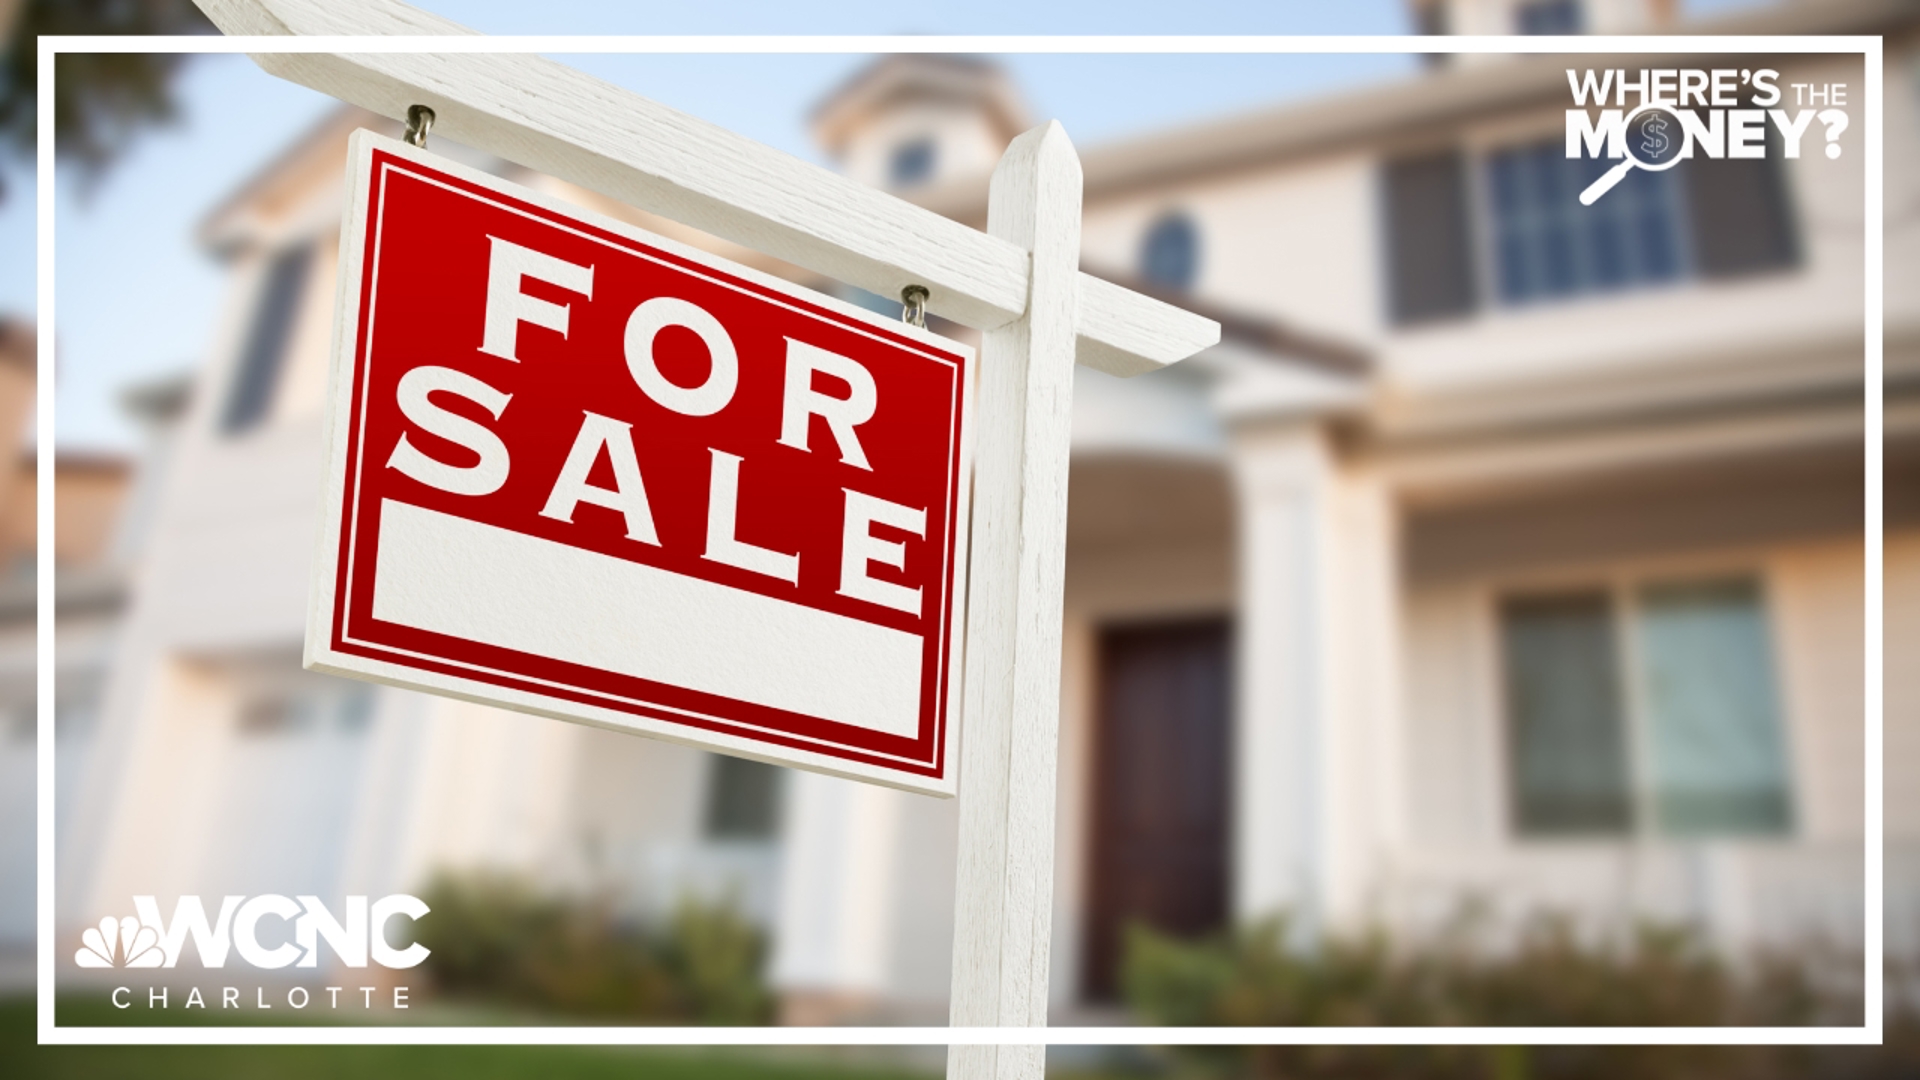 Jane Monreal learns more about the feature and what homebuyers should know.